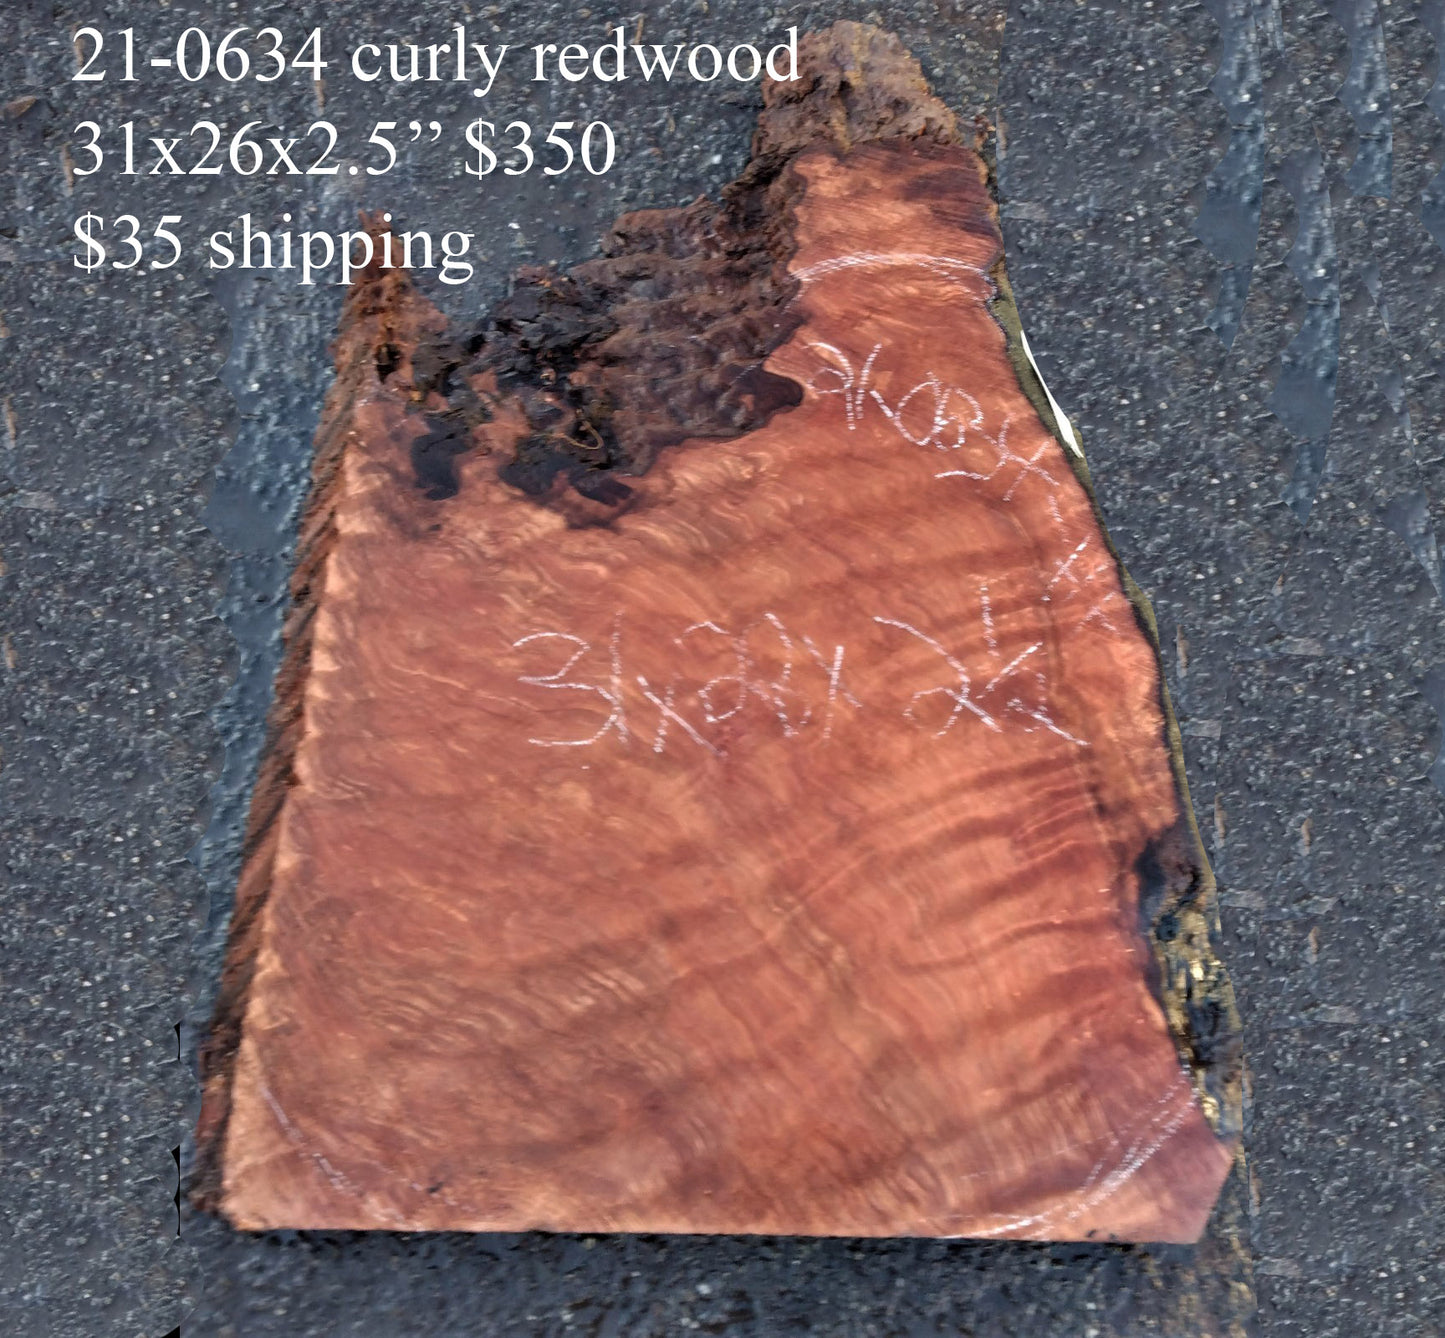 curly redwood | live edge | river table | DIY craft wood | 21-0634-BS